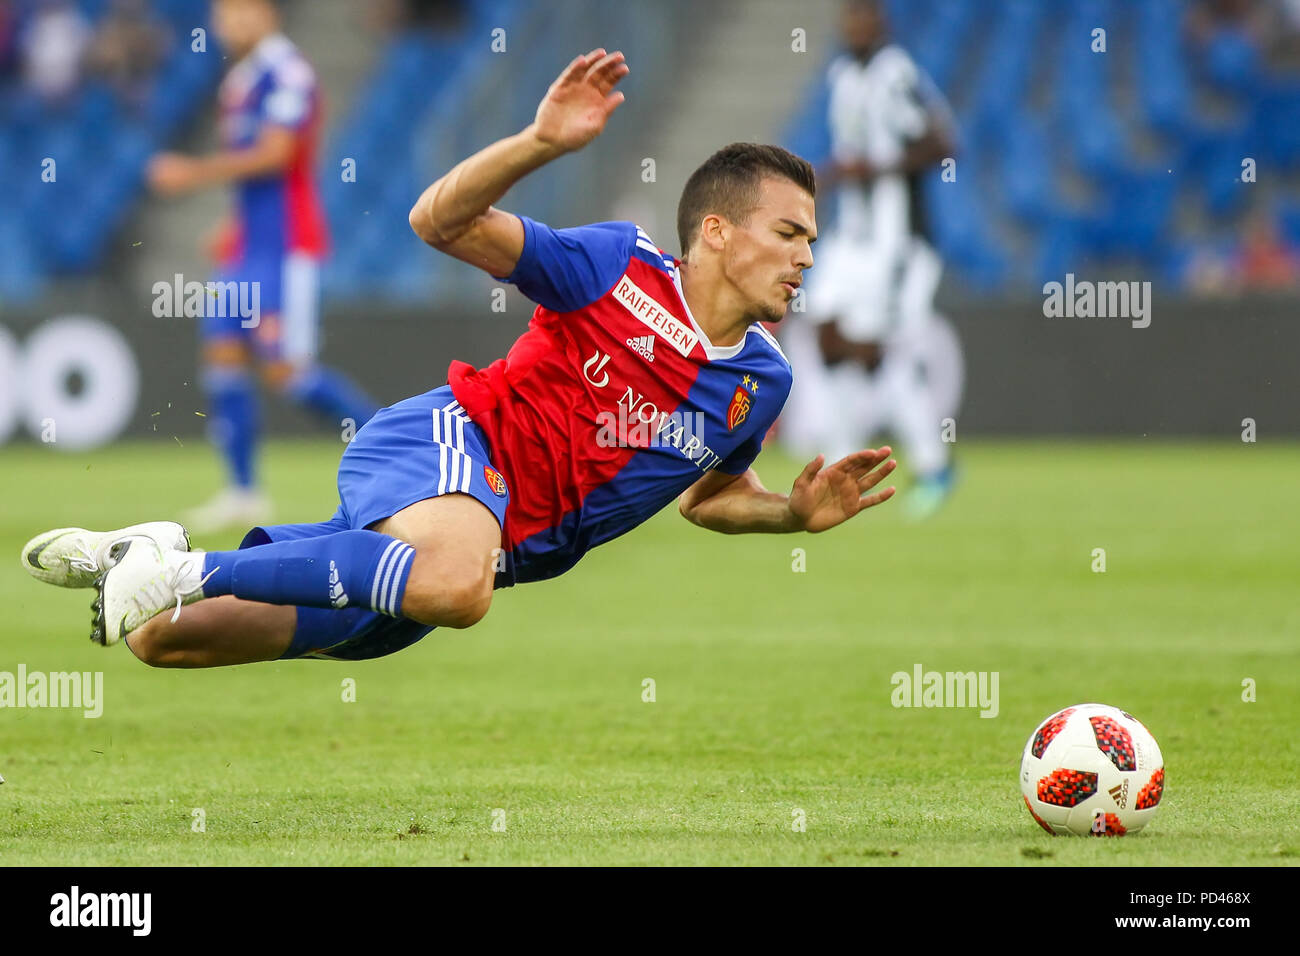 2018 j league hi-res stock photography and images - Alamy